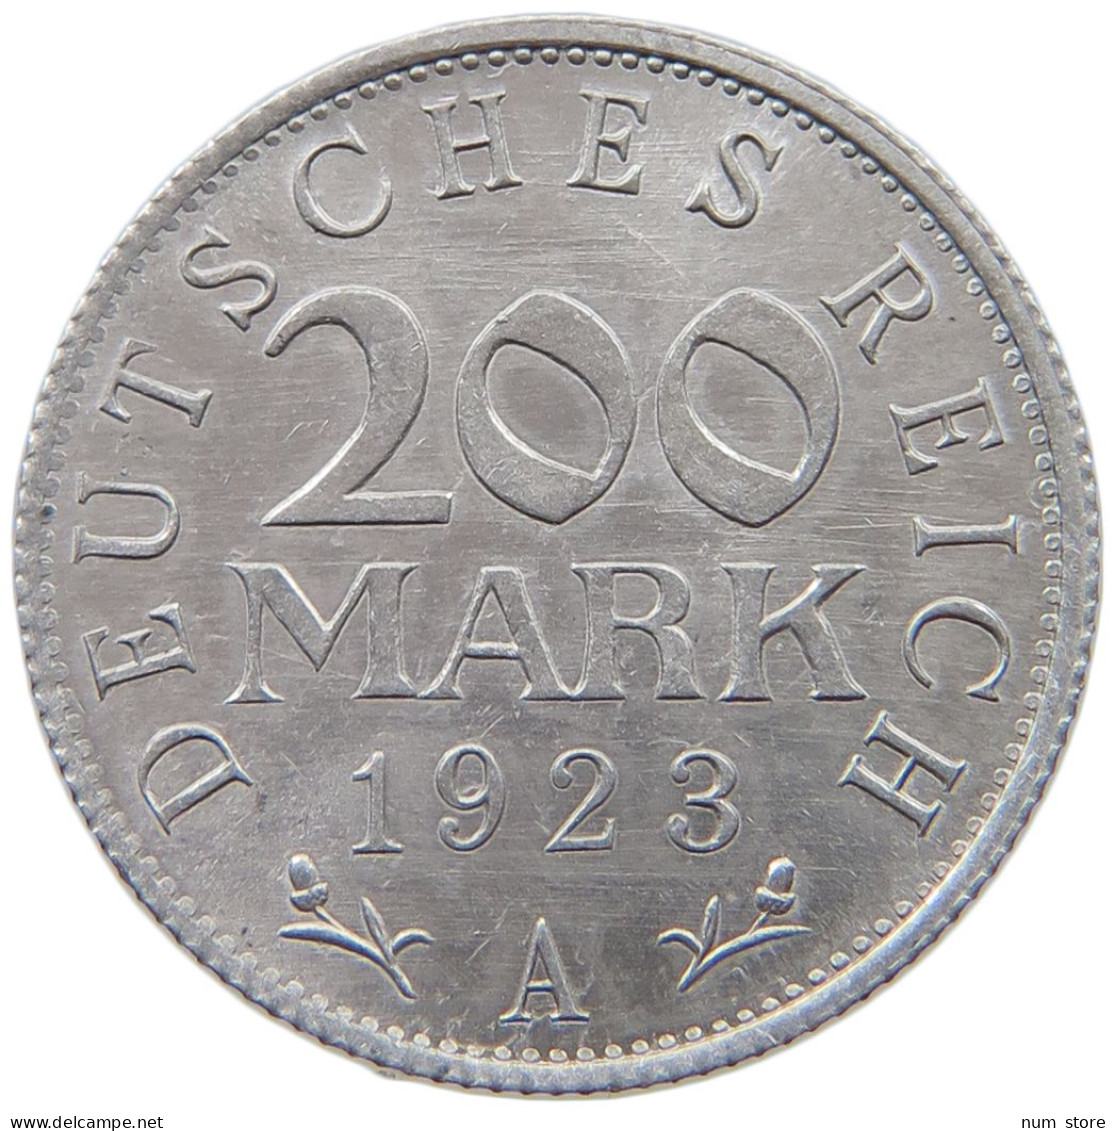 GERMANY WEIMAR 200 MARK 1923 A TOP #a021 0995 - 200 & 500 Mark